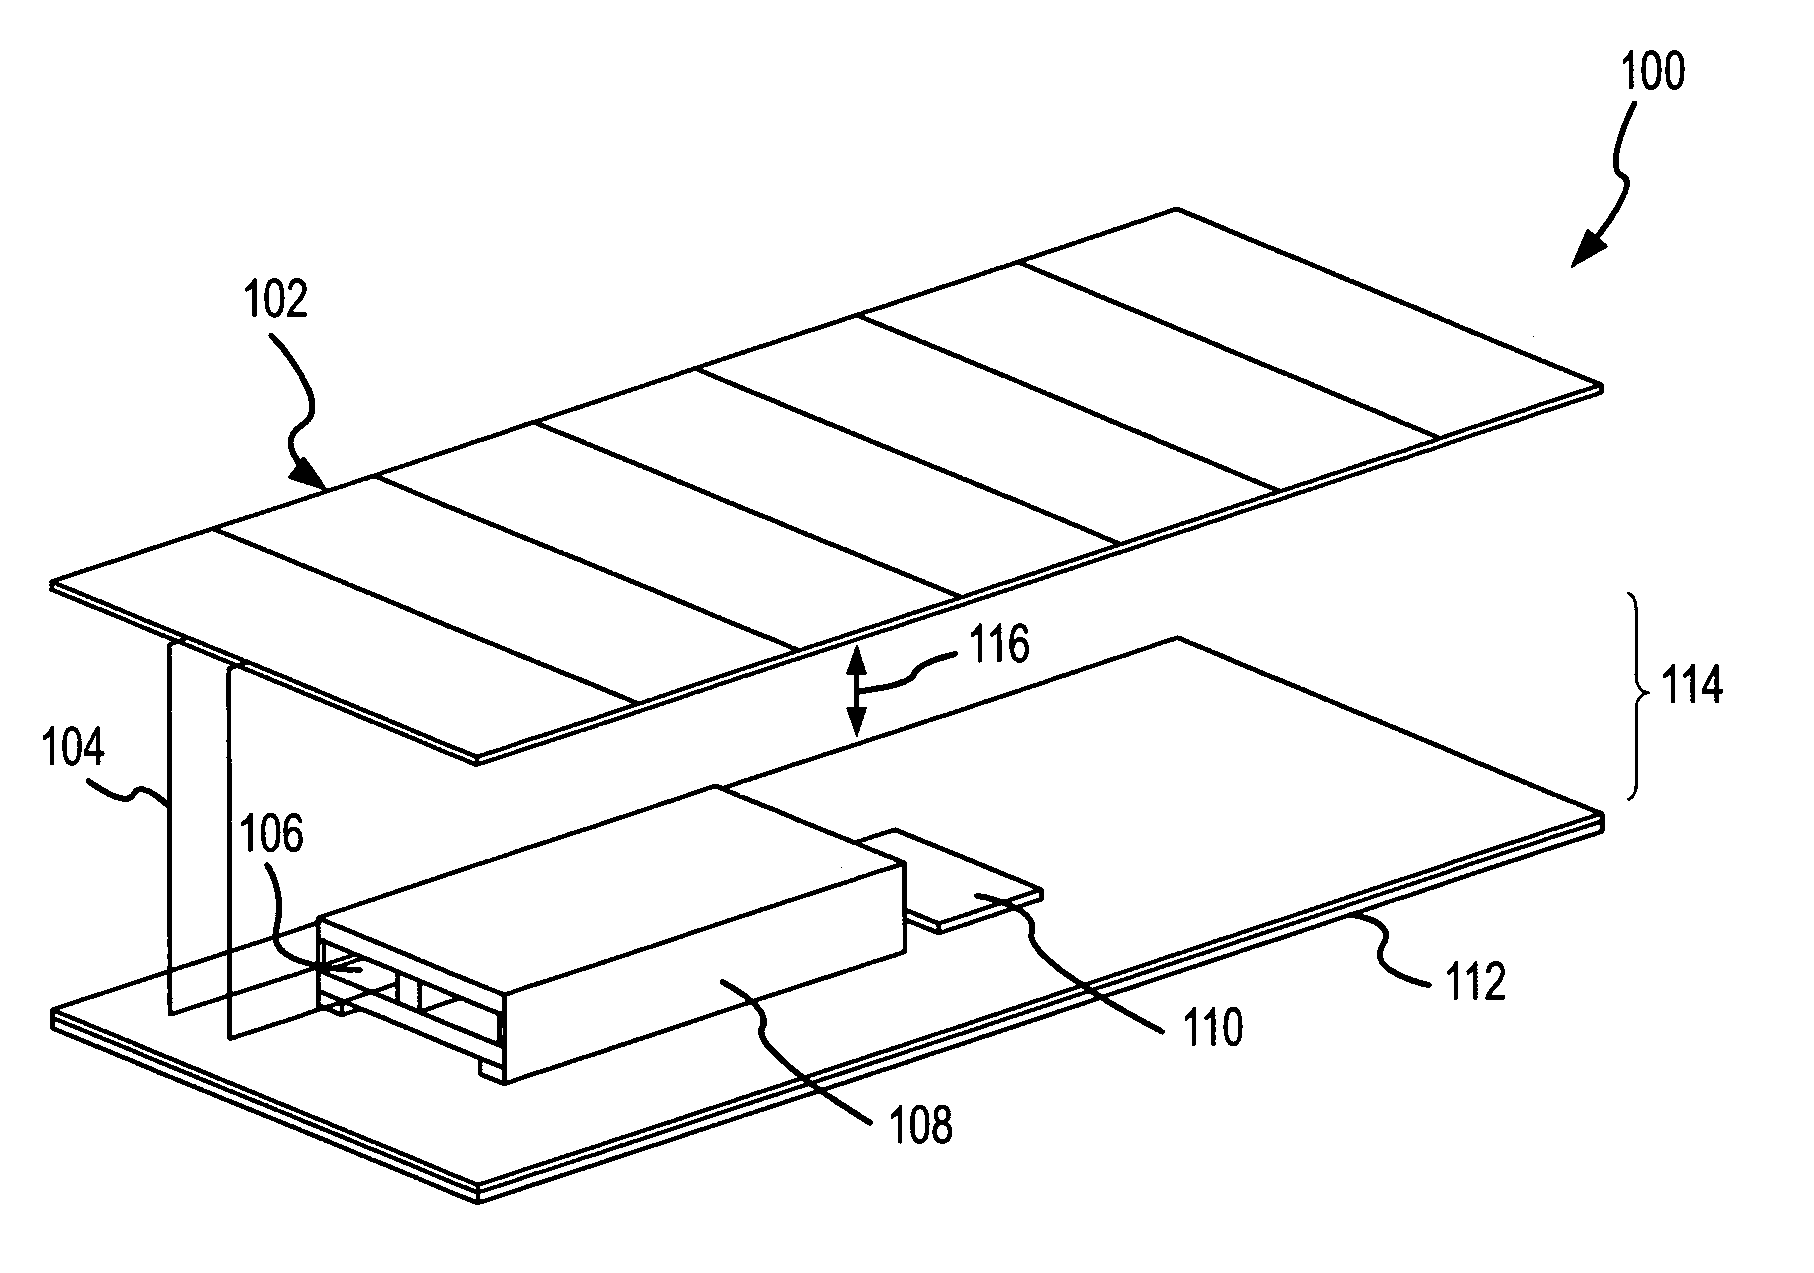 Passive thermal control system